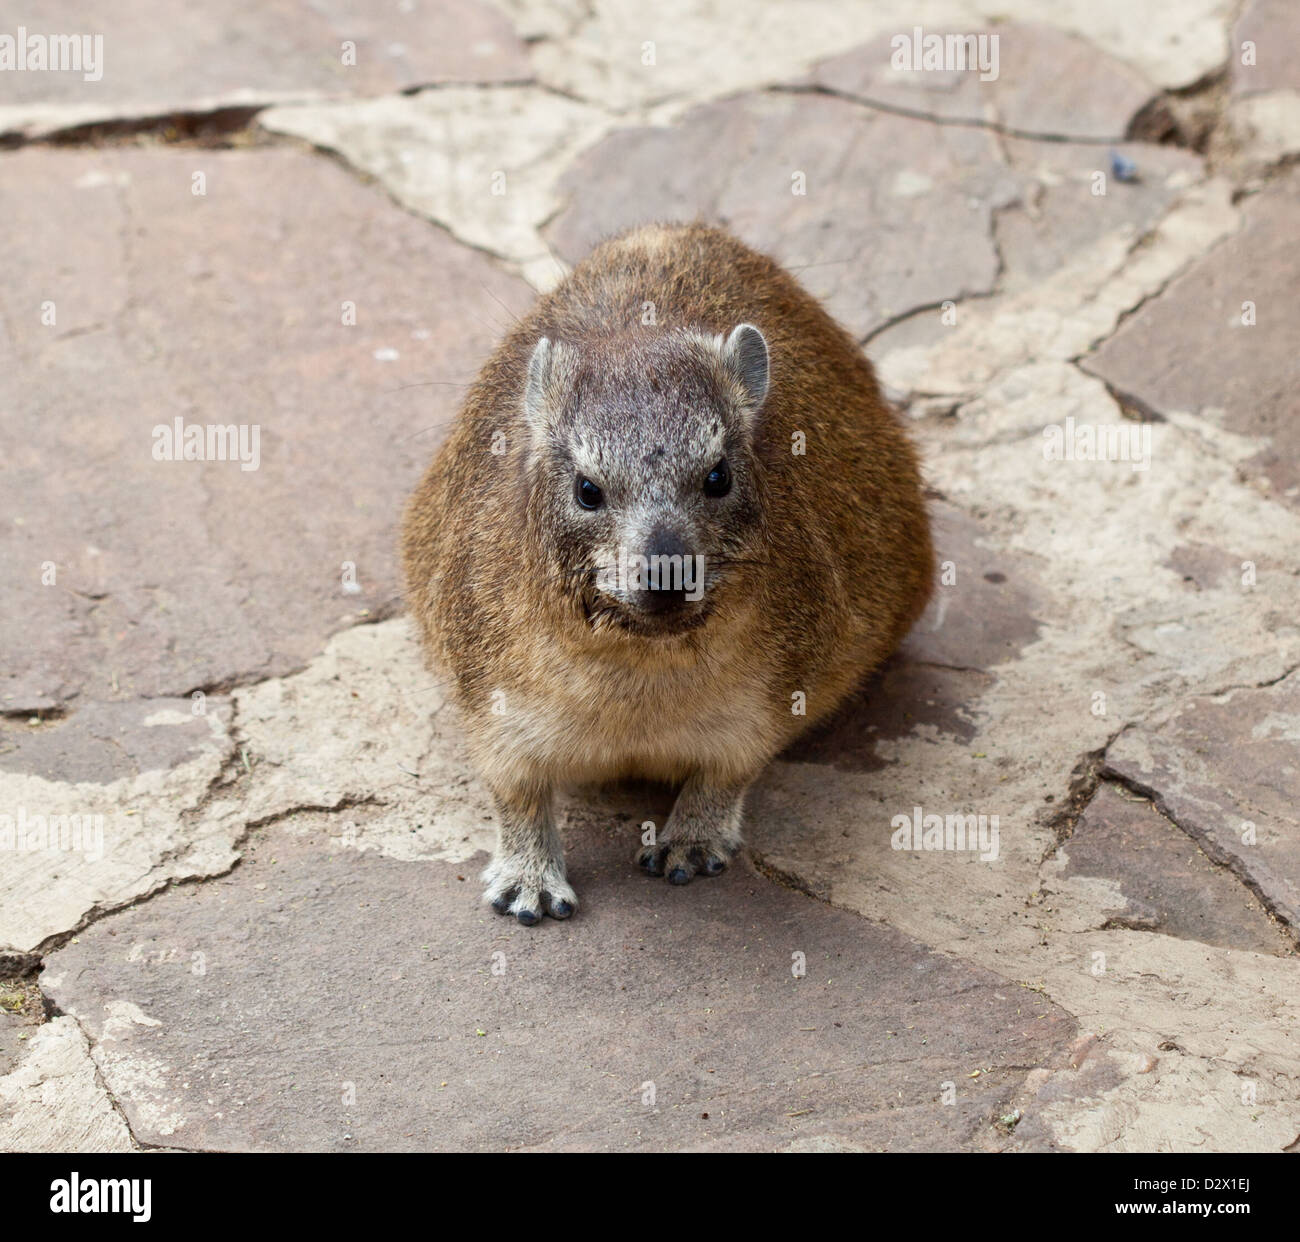 The somewhat smaller pachyderm, the rock hyrax. Serengeti National Park, Tanzania Stock Photo